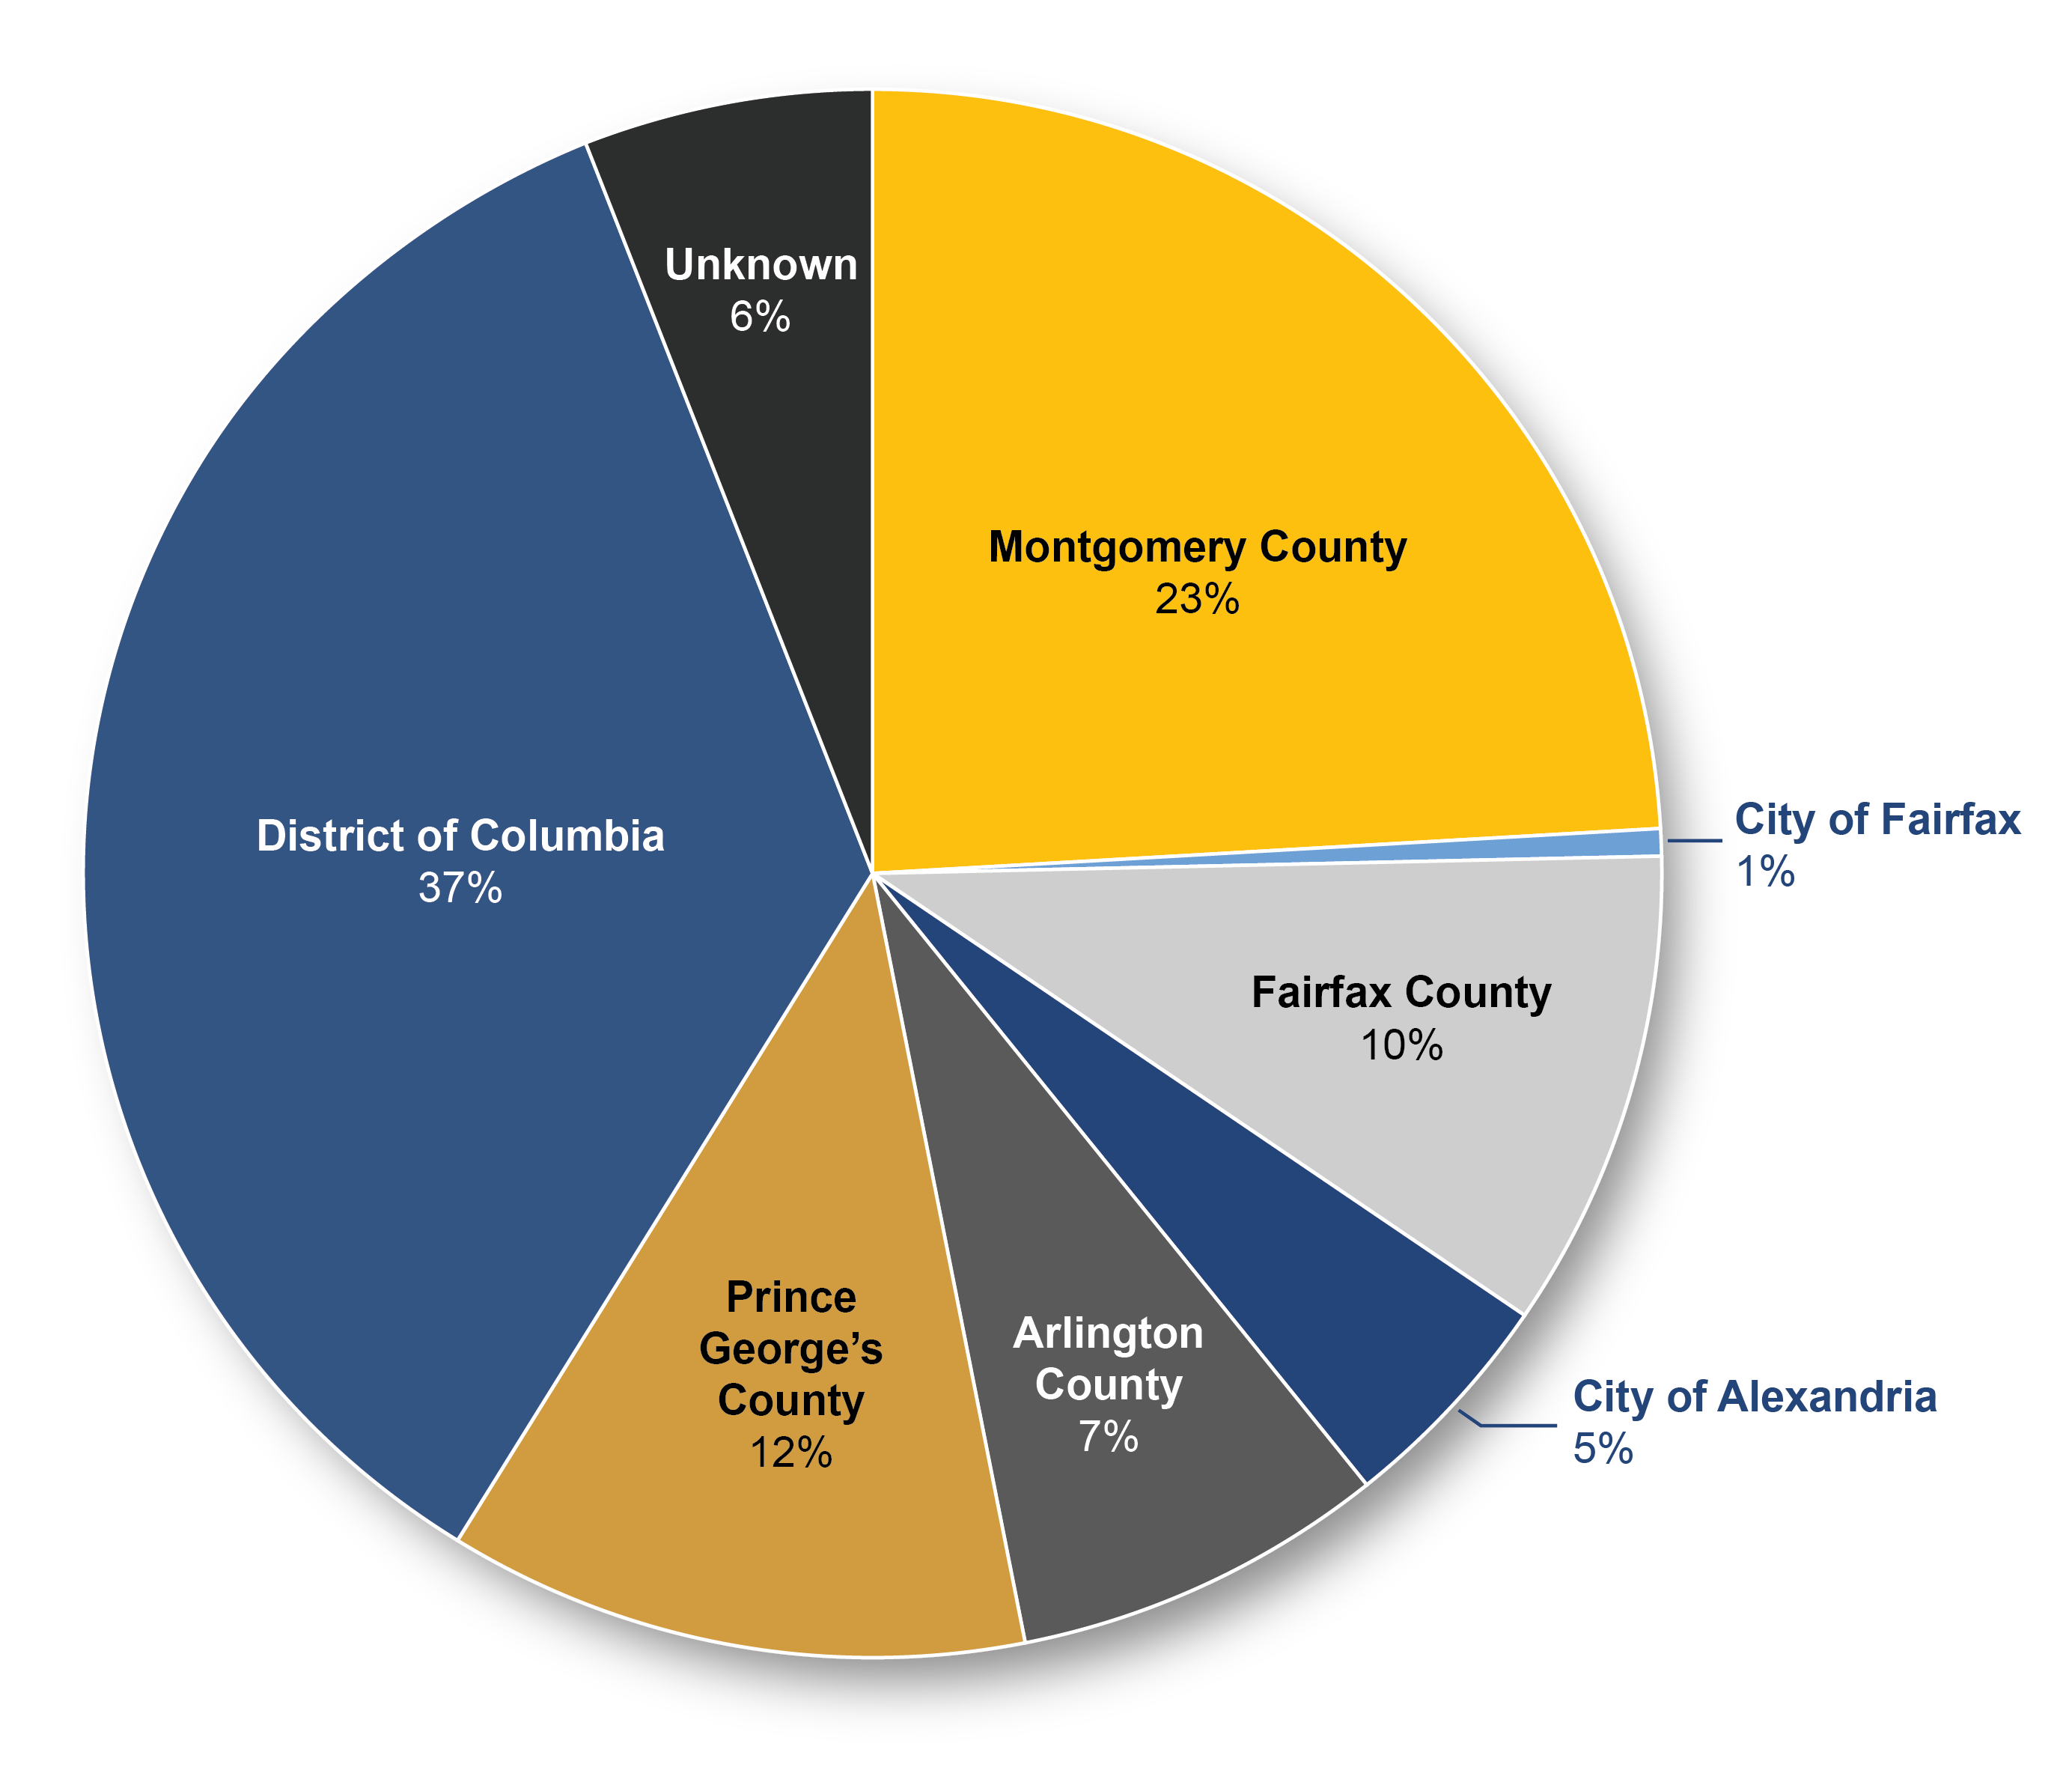 This pie chart shows the percentage of regional bus riders that live in each jurisdiction. Twenty three percent live in Montgomery County, Maryland, one percent live in the City of Fairfax, Virginia, ten percent live in Fairfax County, Virginia, five percent live in the City of Alexandria, Virginia, seven percent live in Arlington County, Virginia, twelve percent live in Prince George’s County, Maryland, thirty-seven percent live in the District of Columbia, and six percent live in other or unknown jurisdictions.